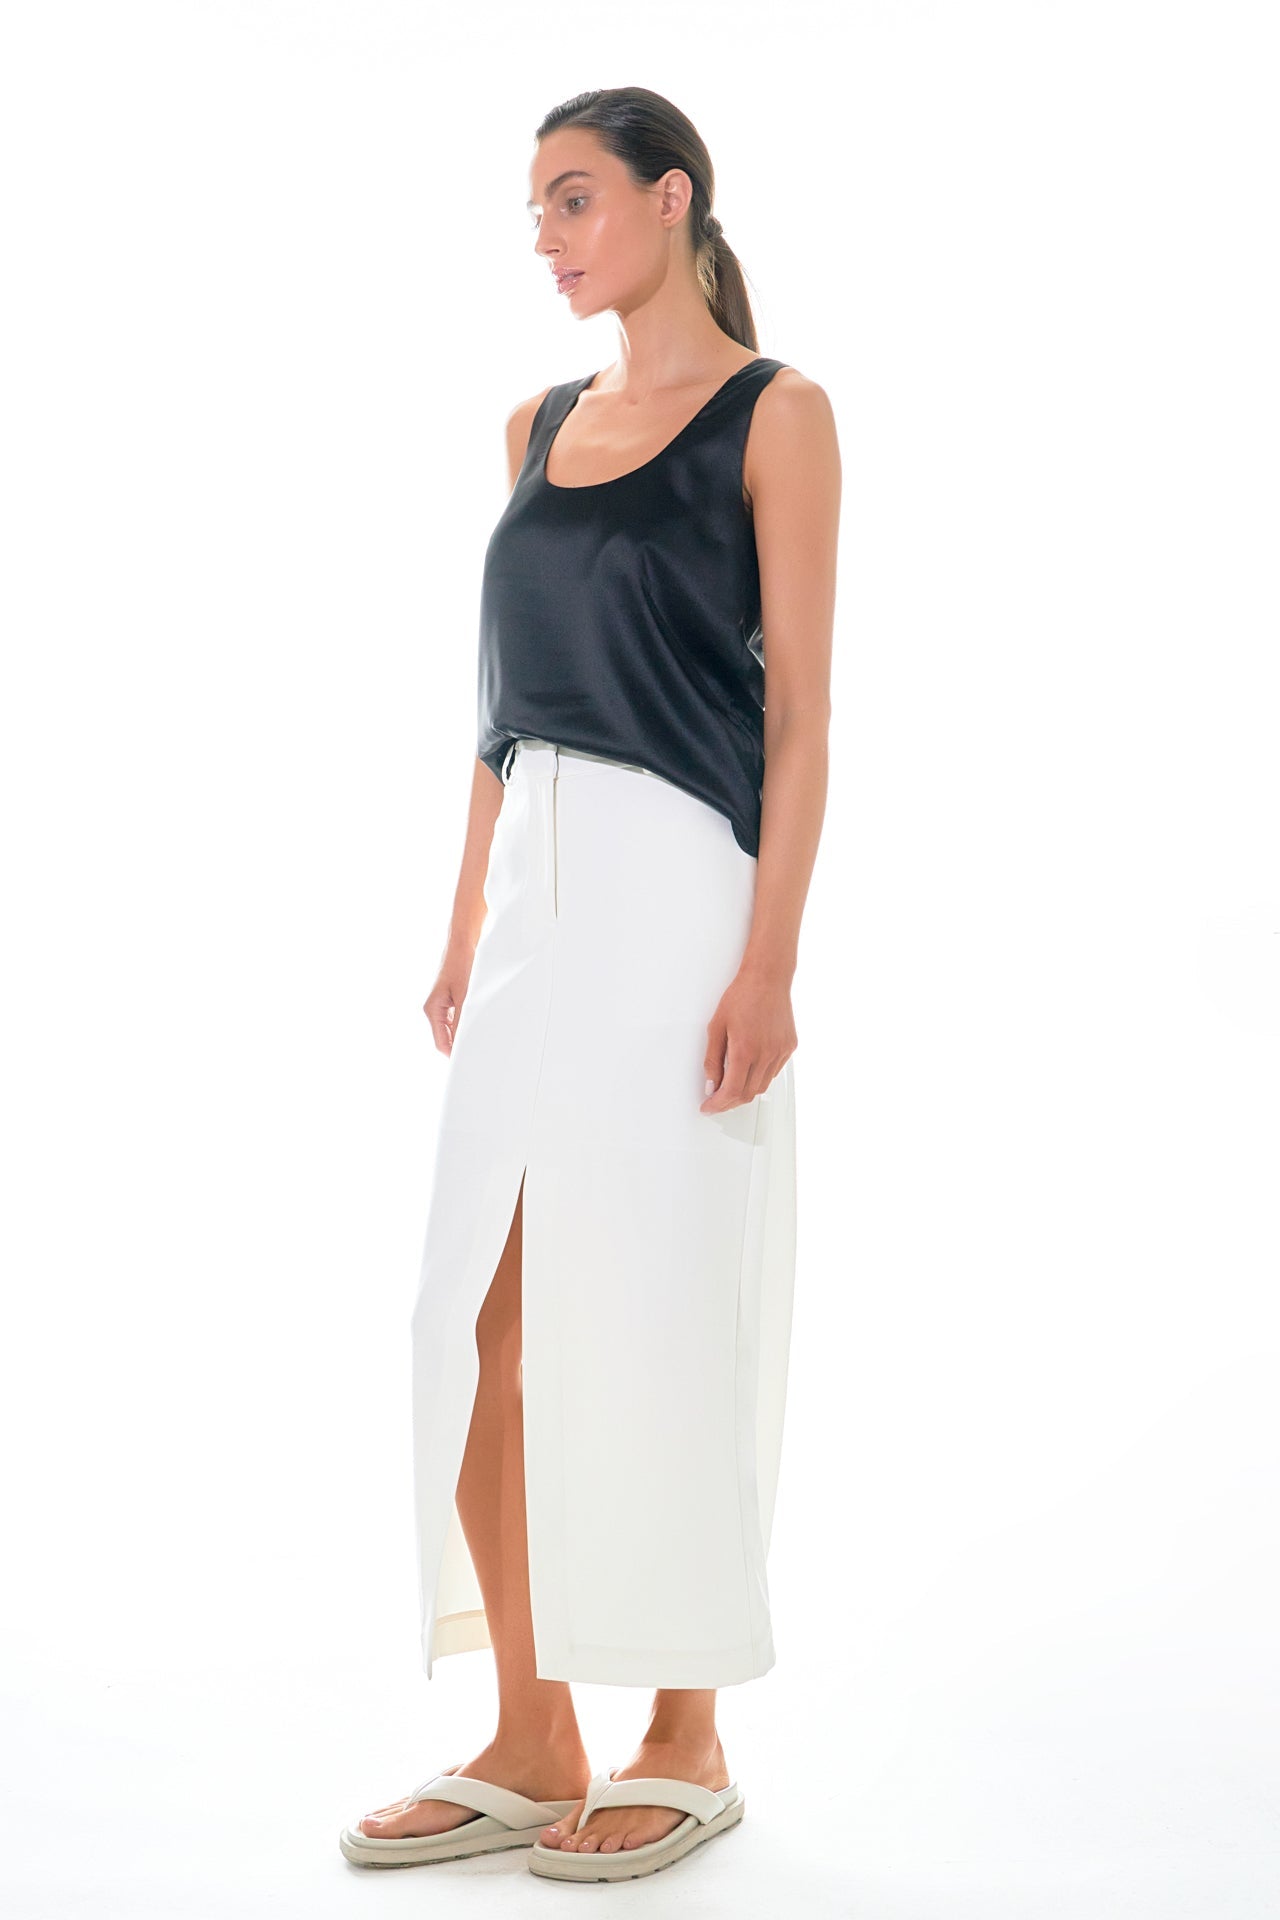 GREY LAB - Mid-Waisted Front Slit Maxi Skirt - SKIRTS available at Objectrare